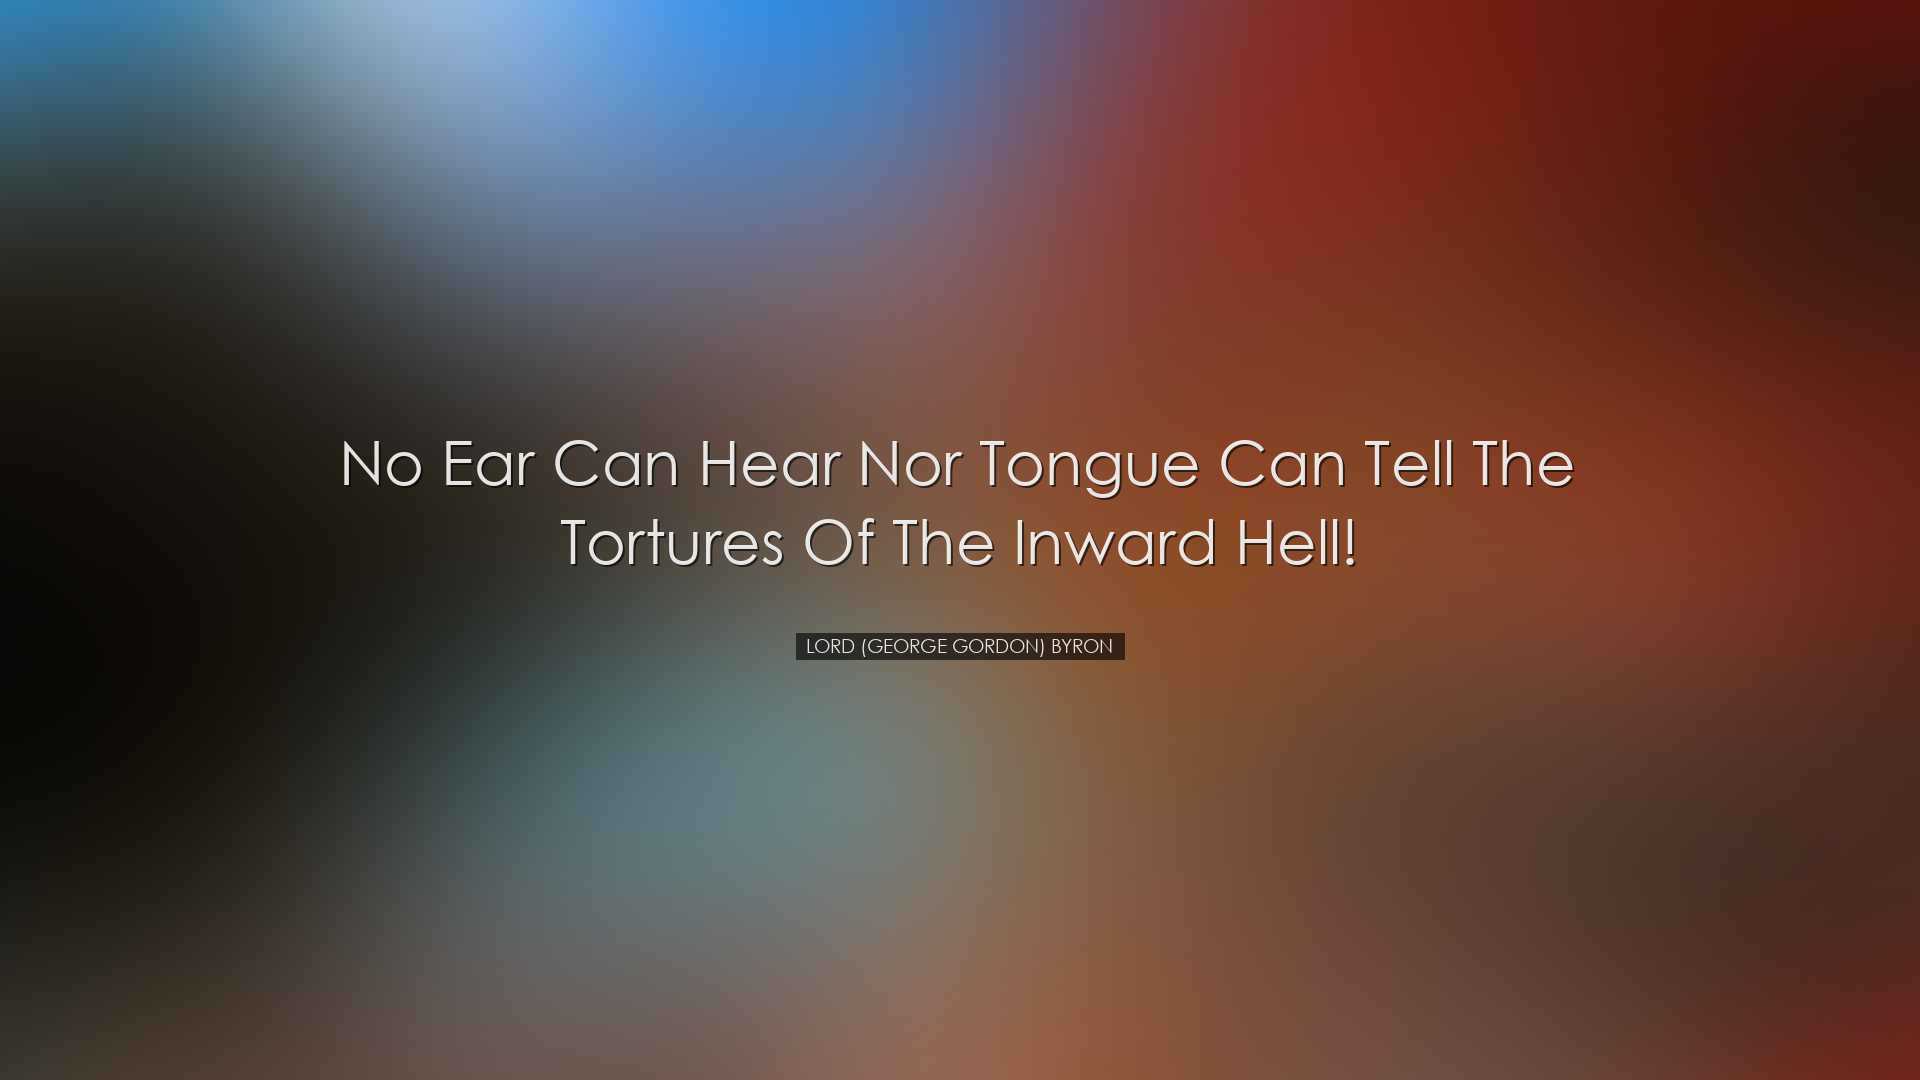 No ear can hear nor tongue can tell the tortures of the inward hel